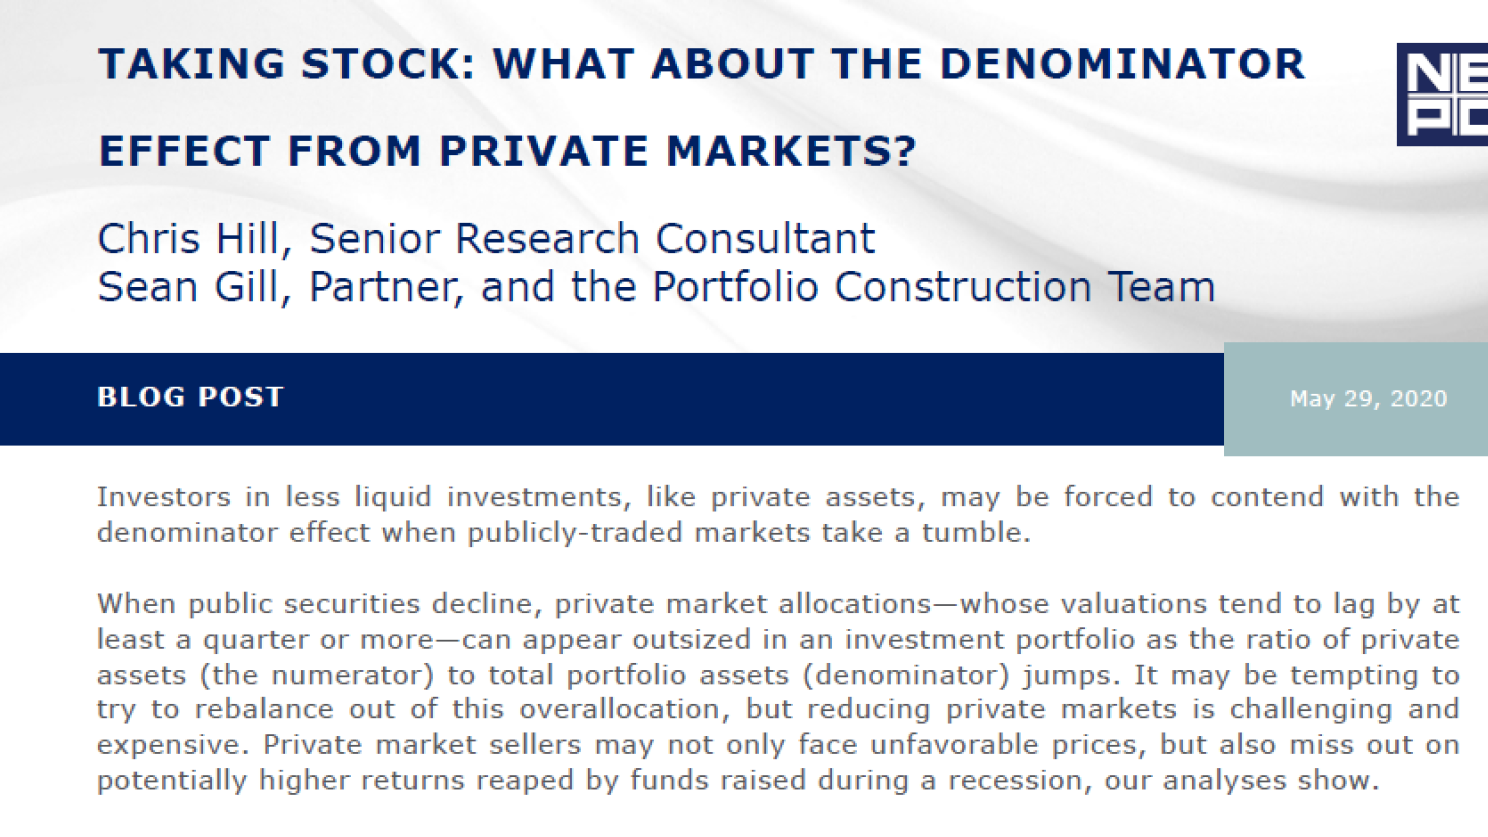 Taking Stock: What About the Denominator Effect from Private Markets?